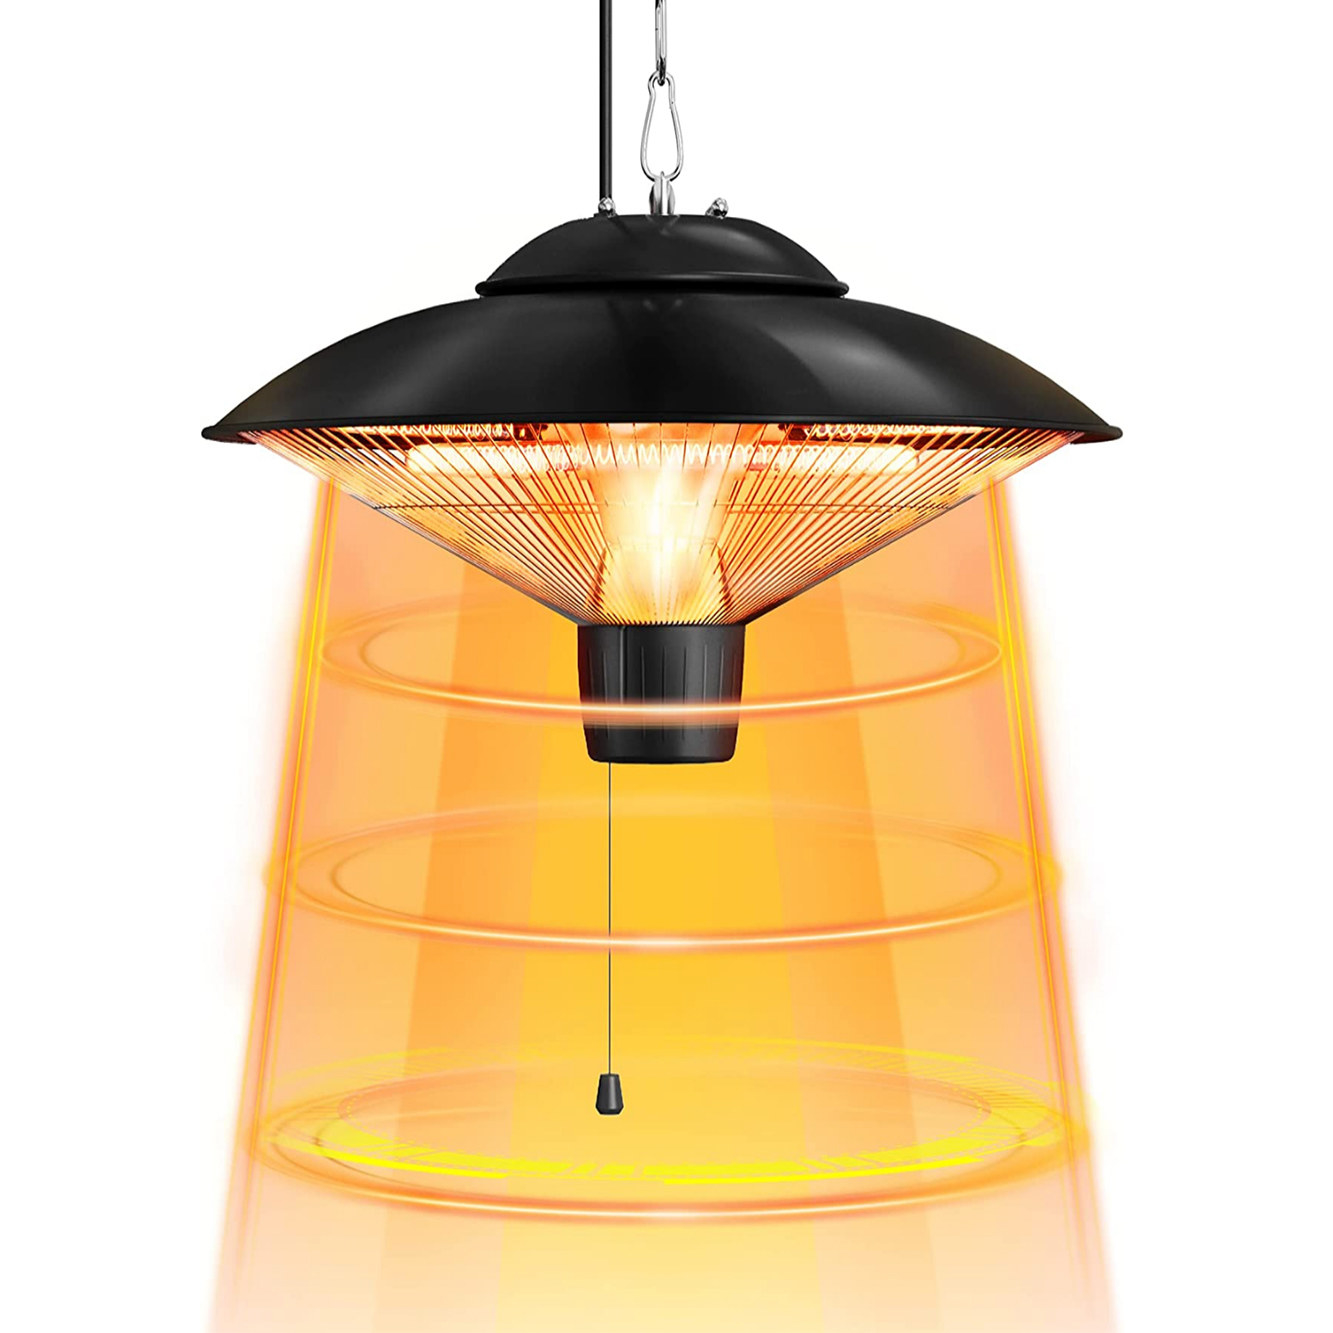 An image of a HINXIETIE hanging patio heater